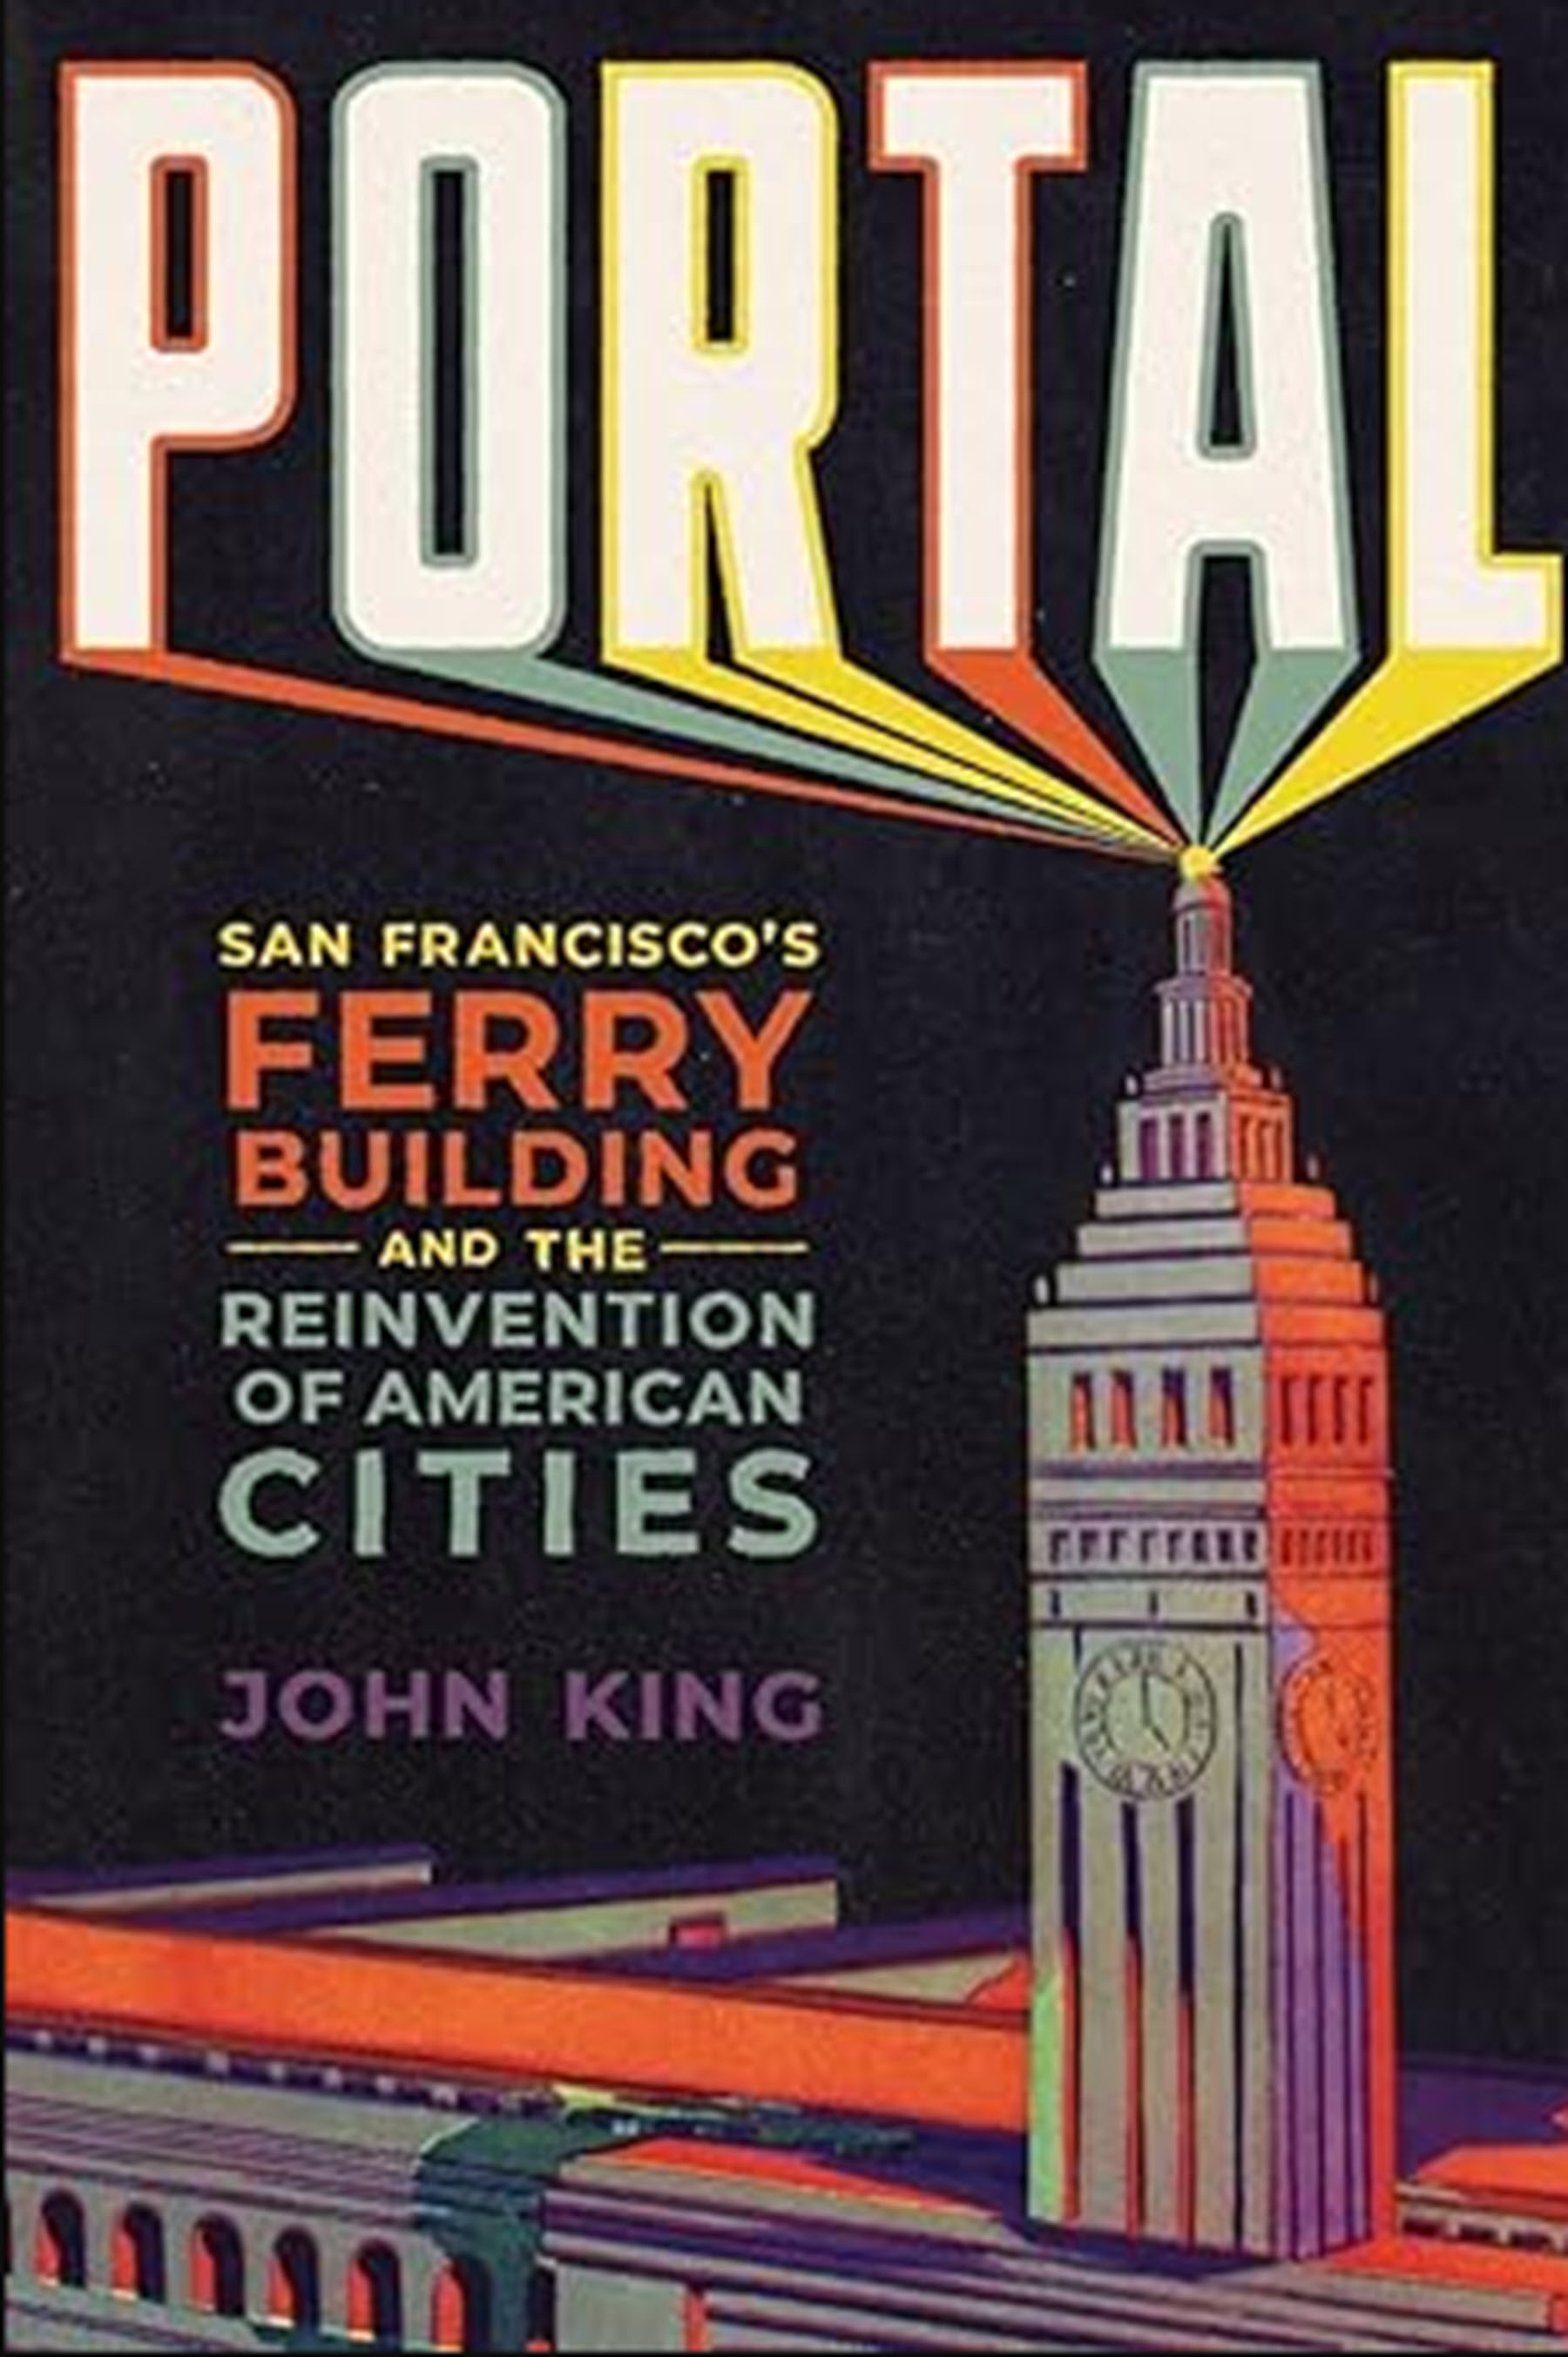 book cover featuring a clock tower